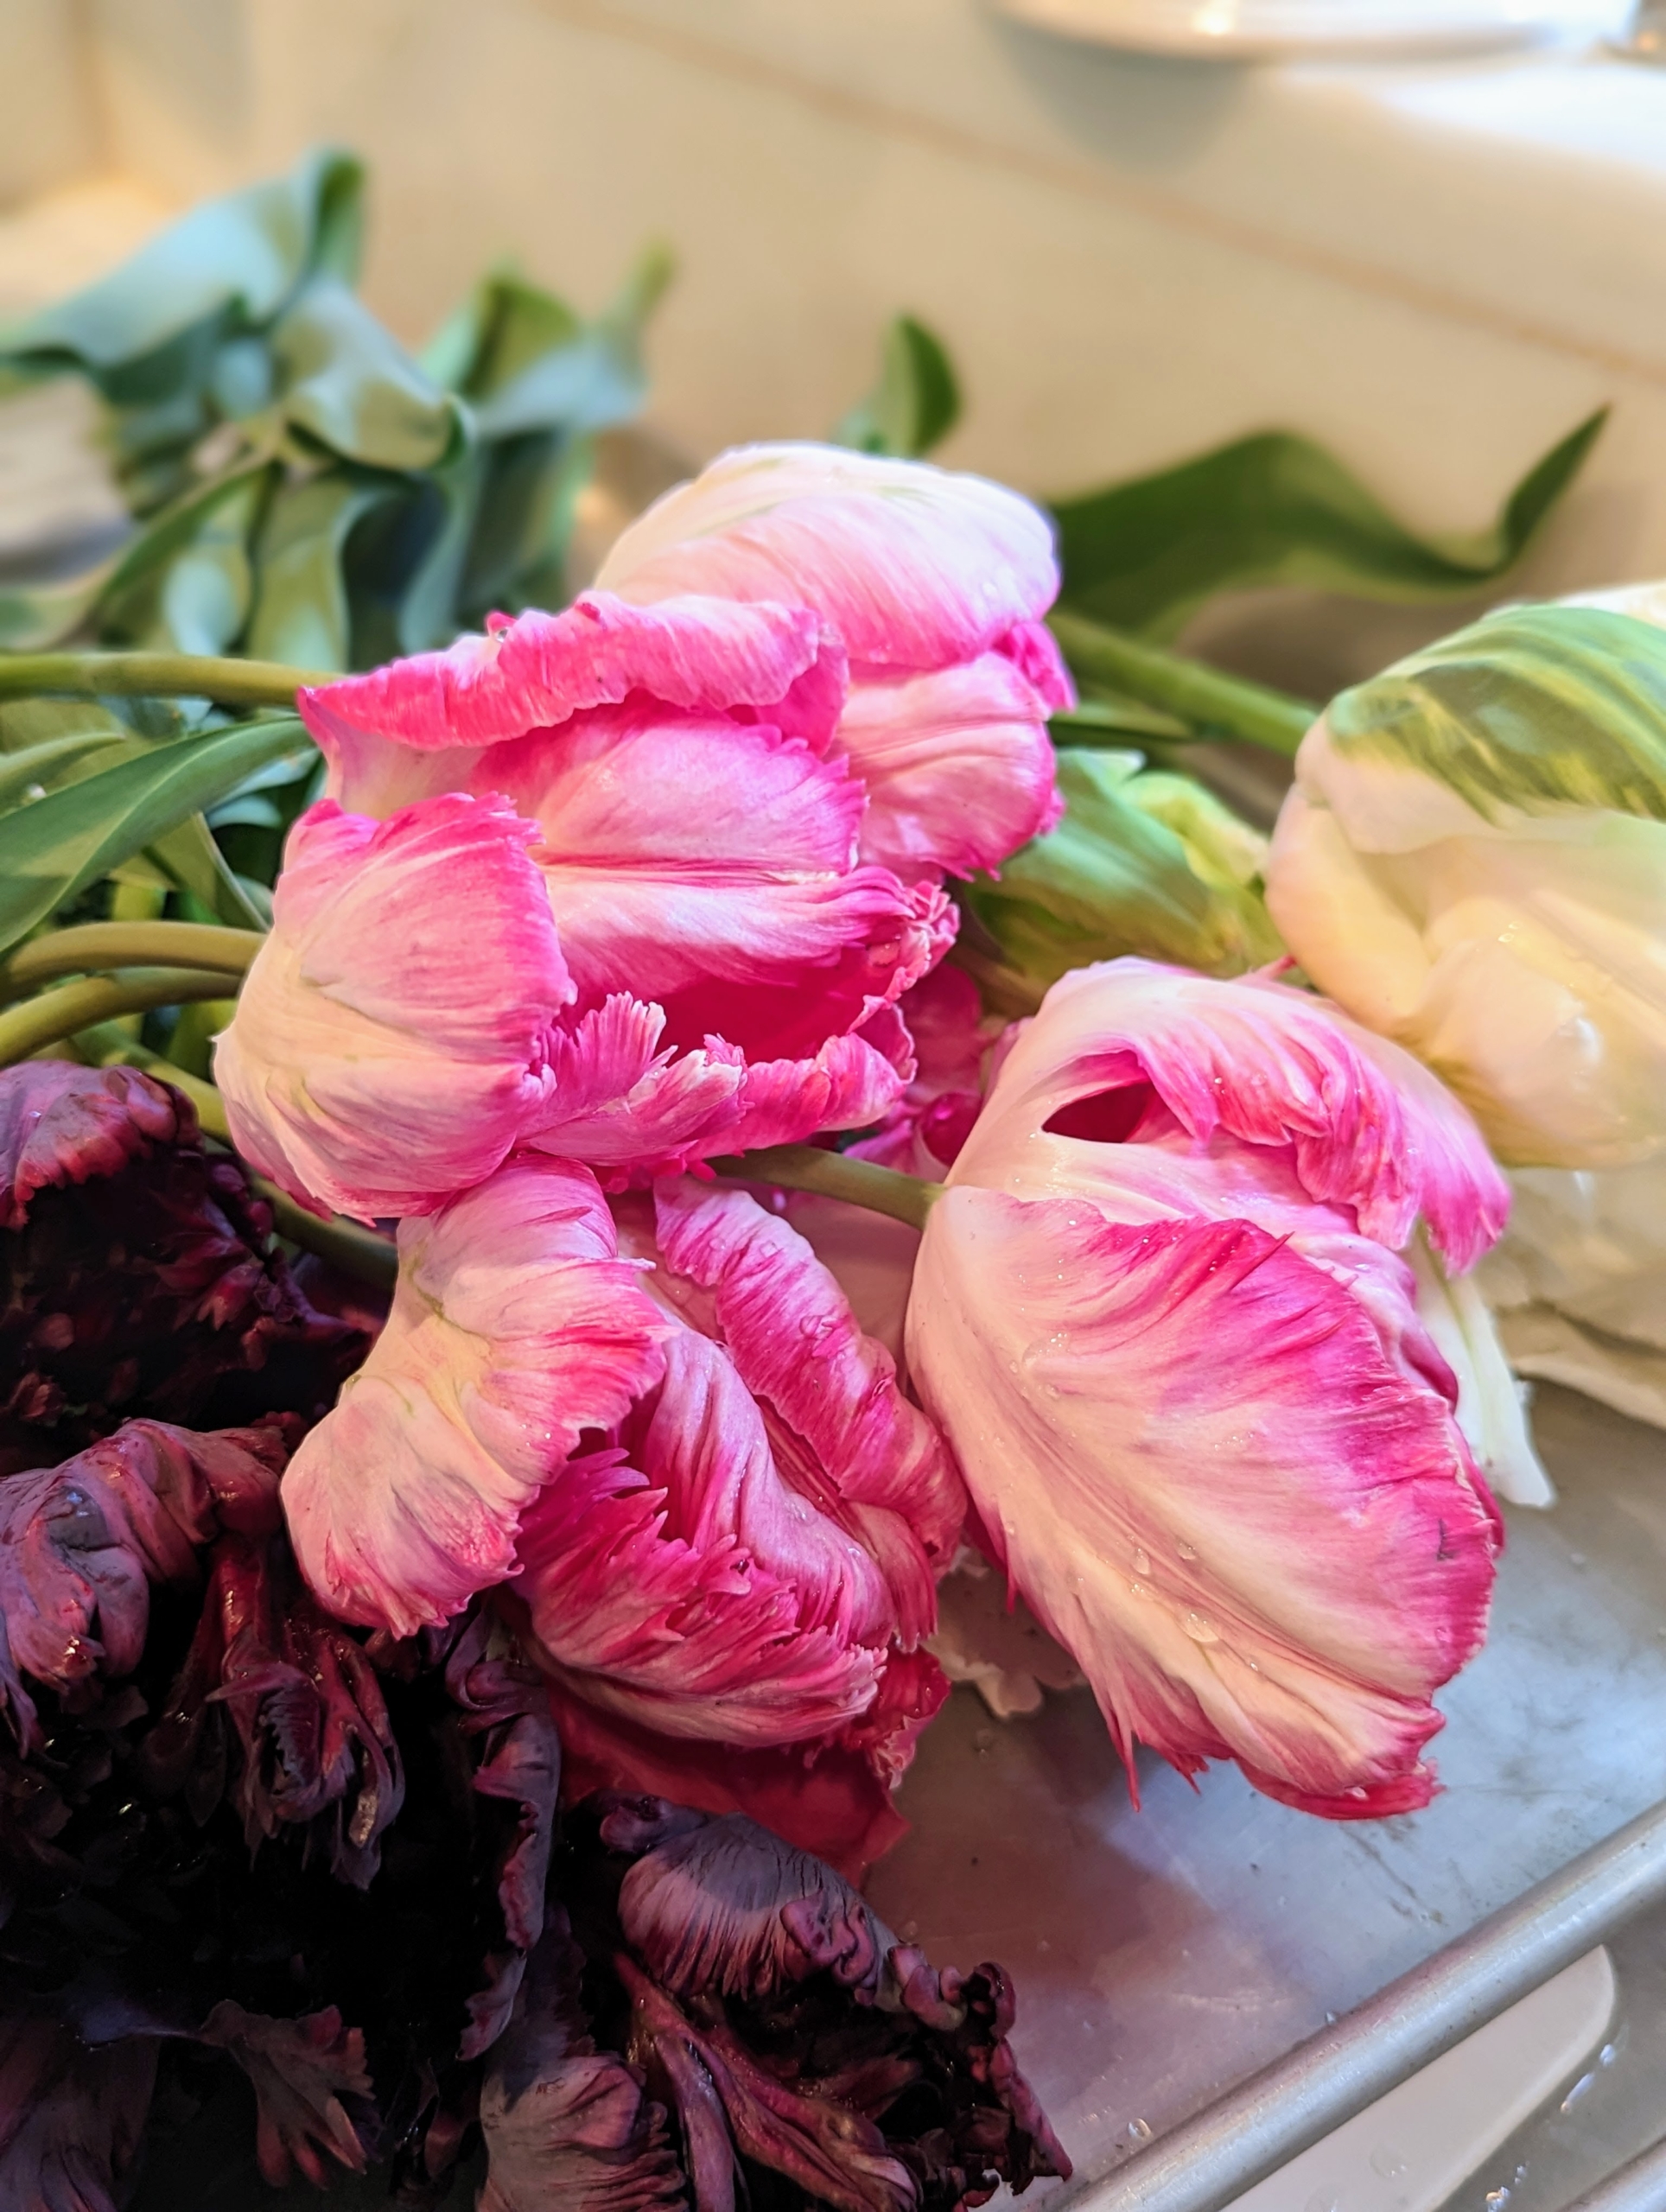 Cutting and Arranging Spring Tulips from the Garden - The Martha